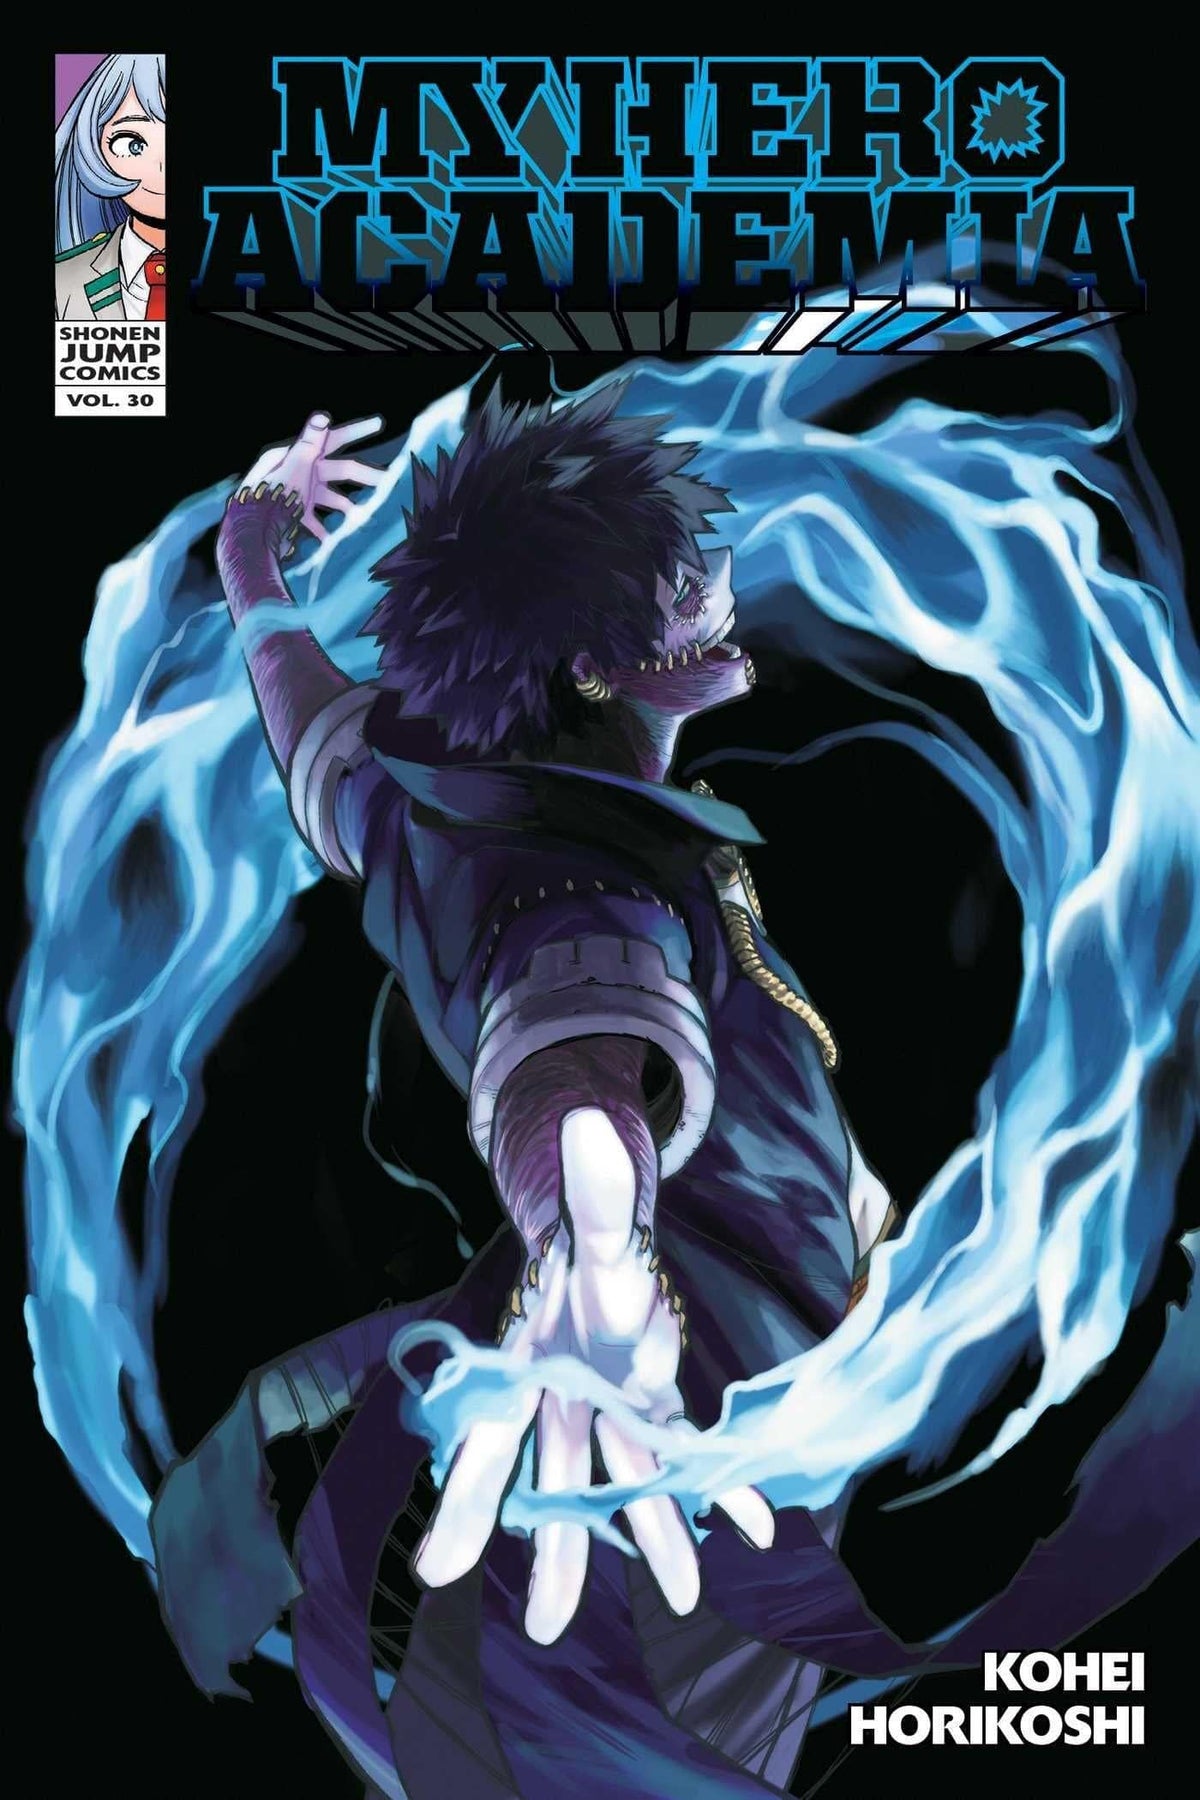 VIZ Media - Twin Star Exorcists, Vol. 27 is now available